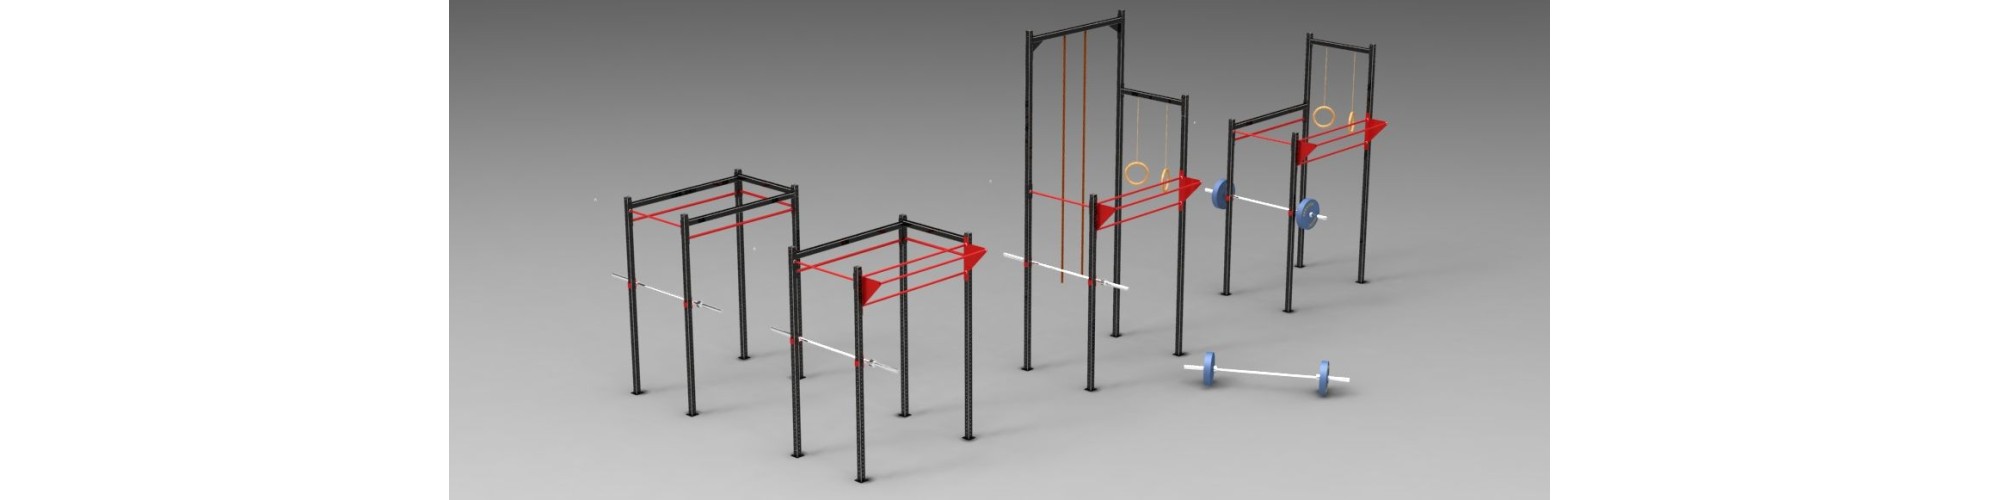 Cross fit rigs for Home Use